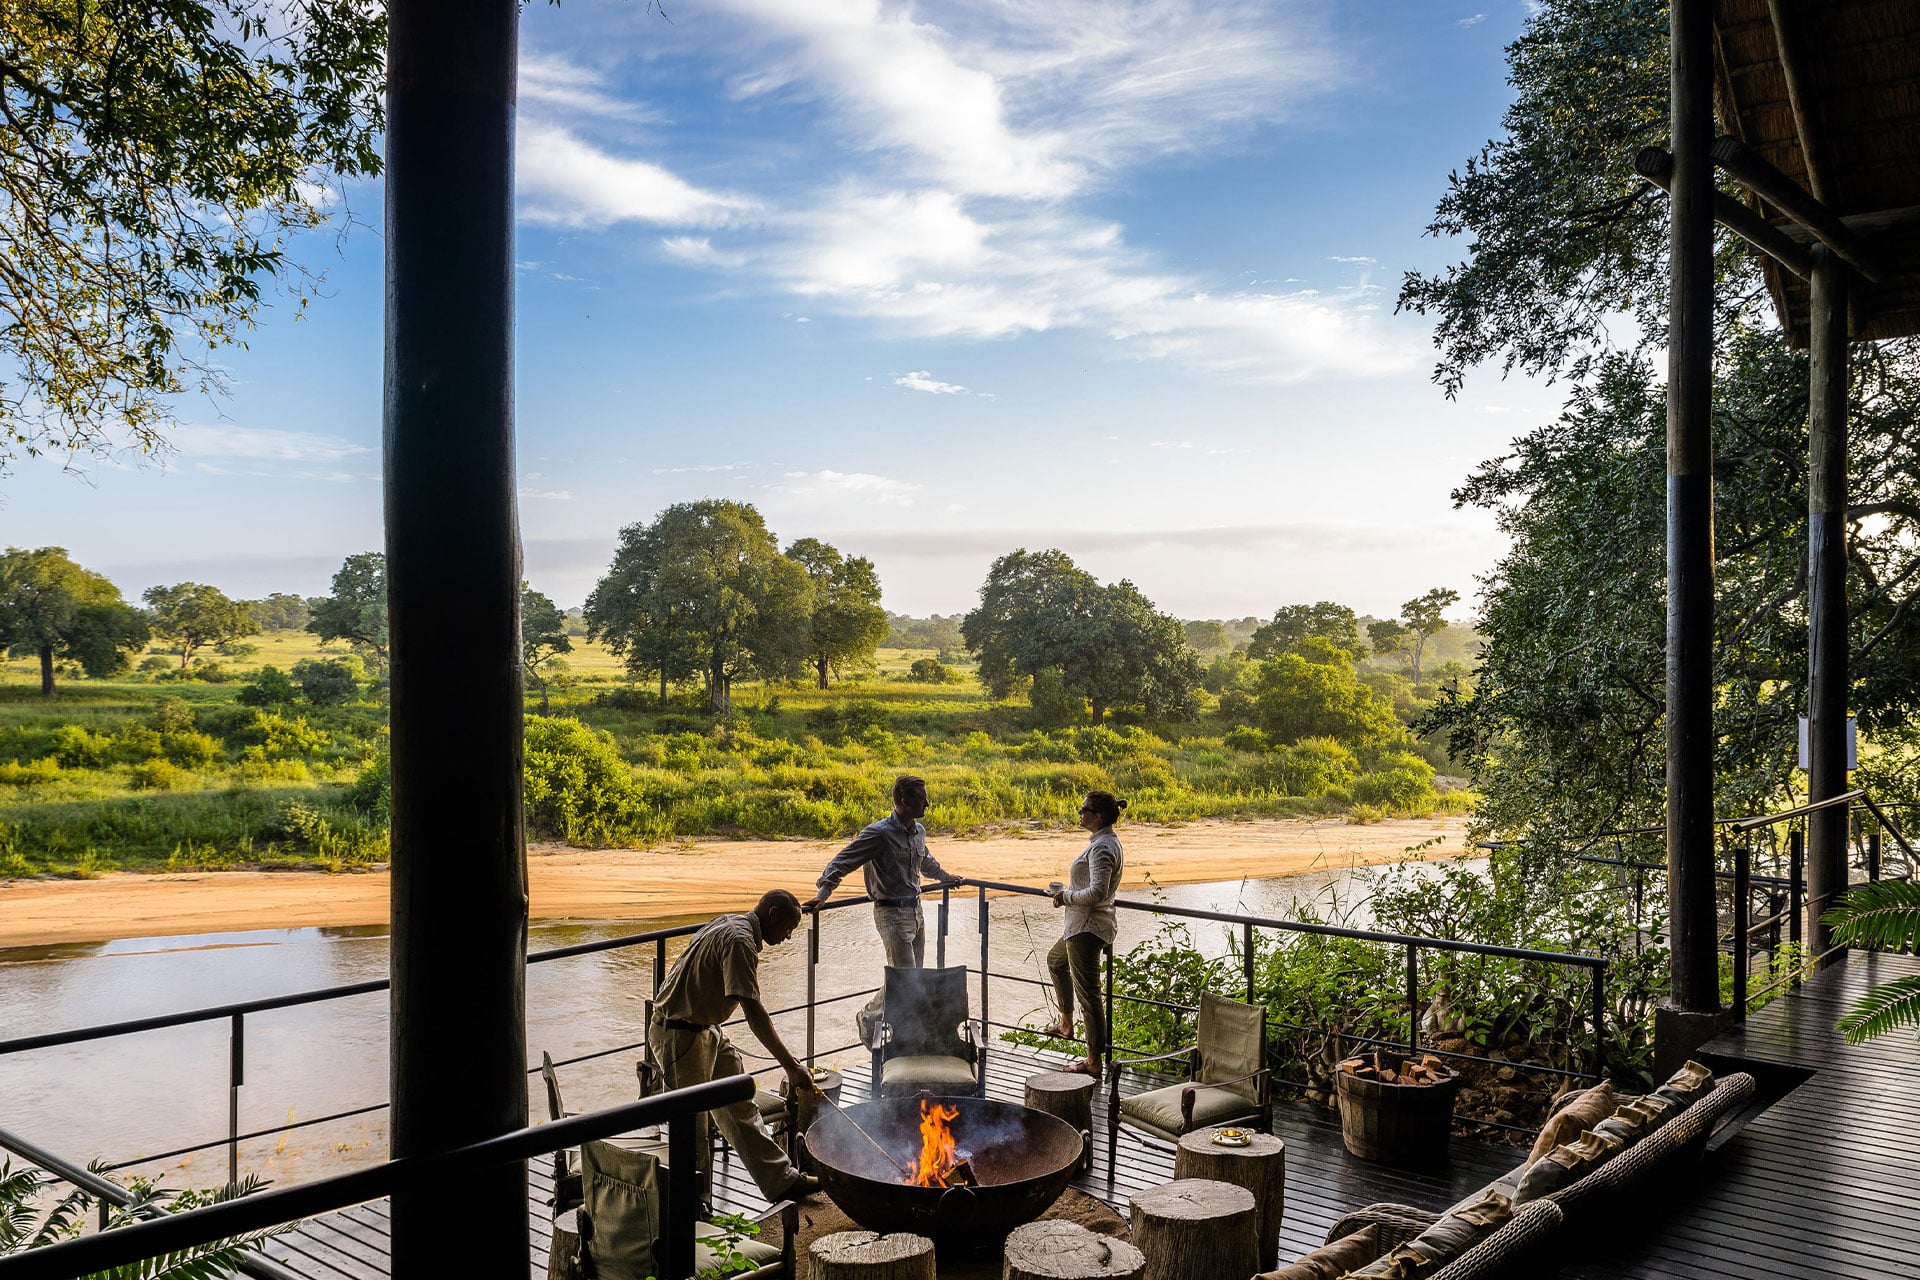 People gathered around the fire pit on the wooden deck with views of the Sand River at Singita Sabi Sands Ebony Lodge.